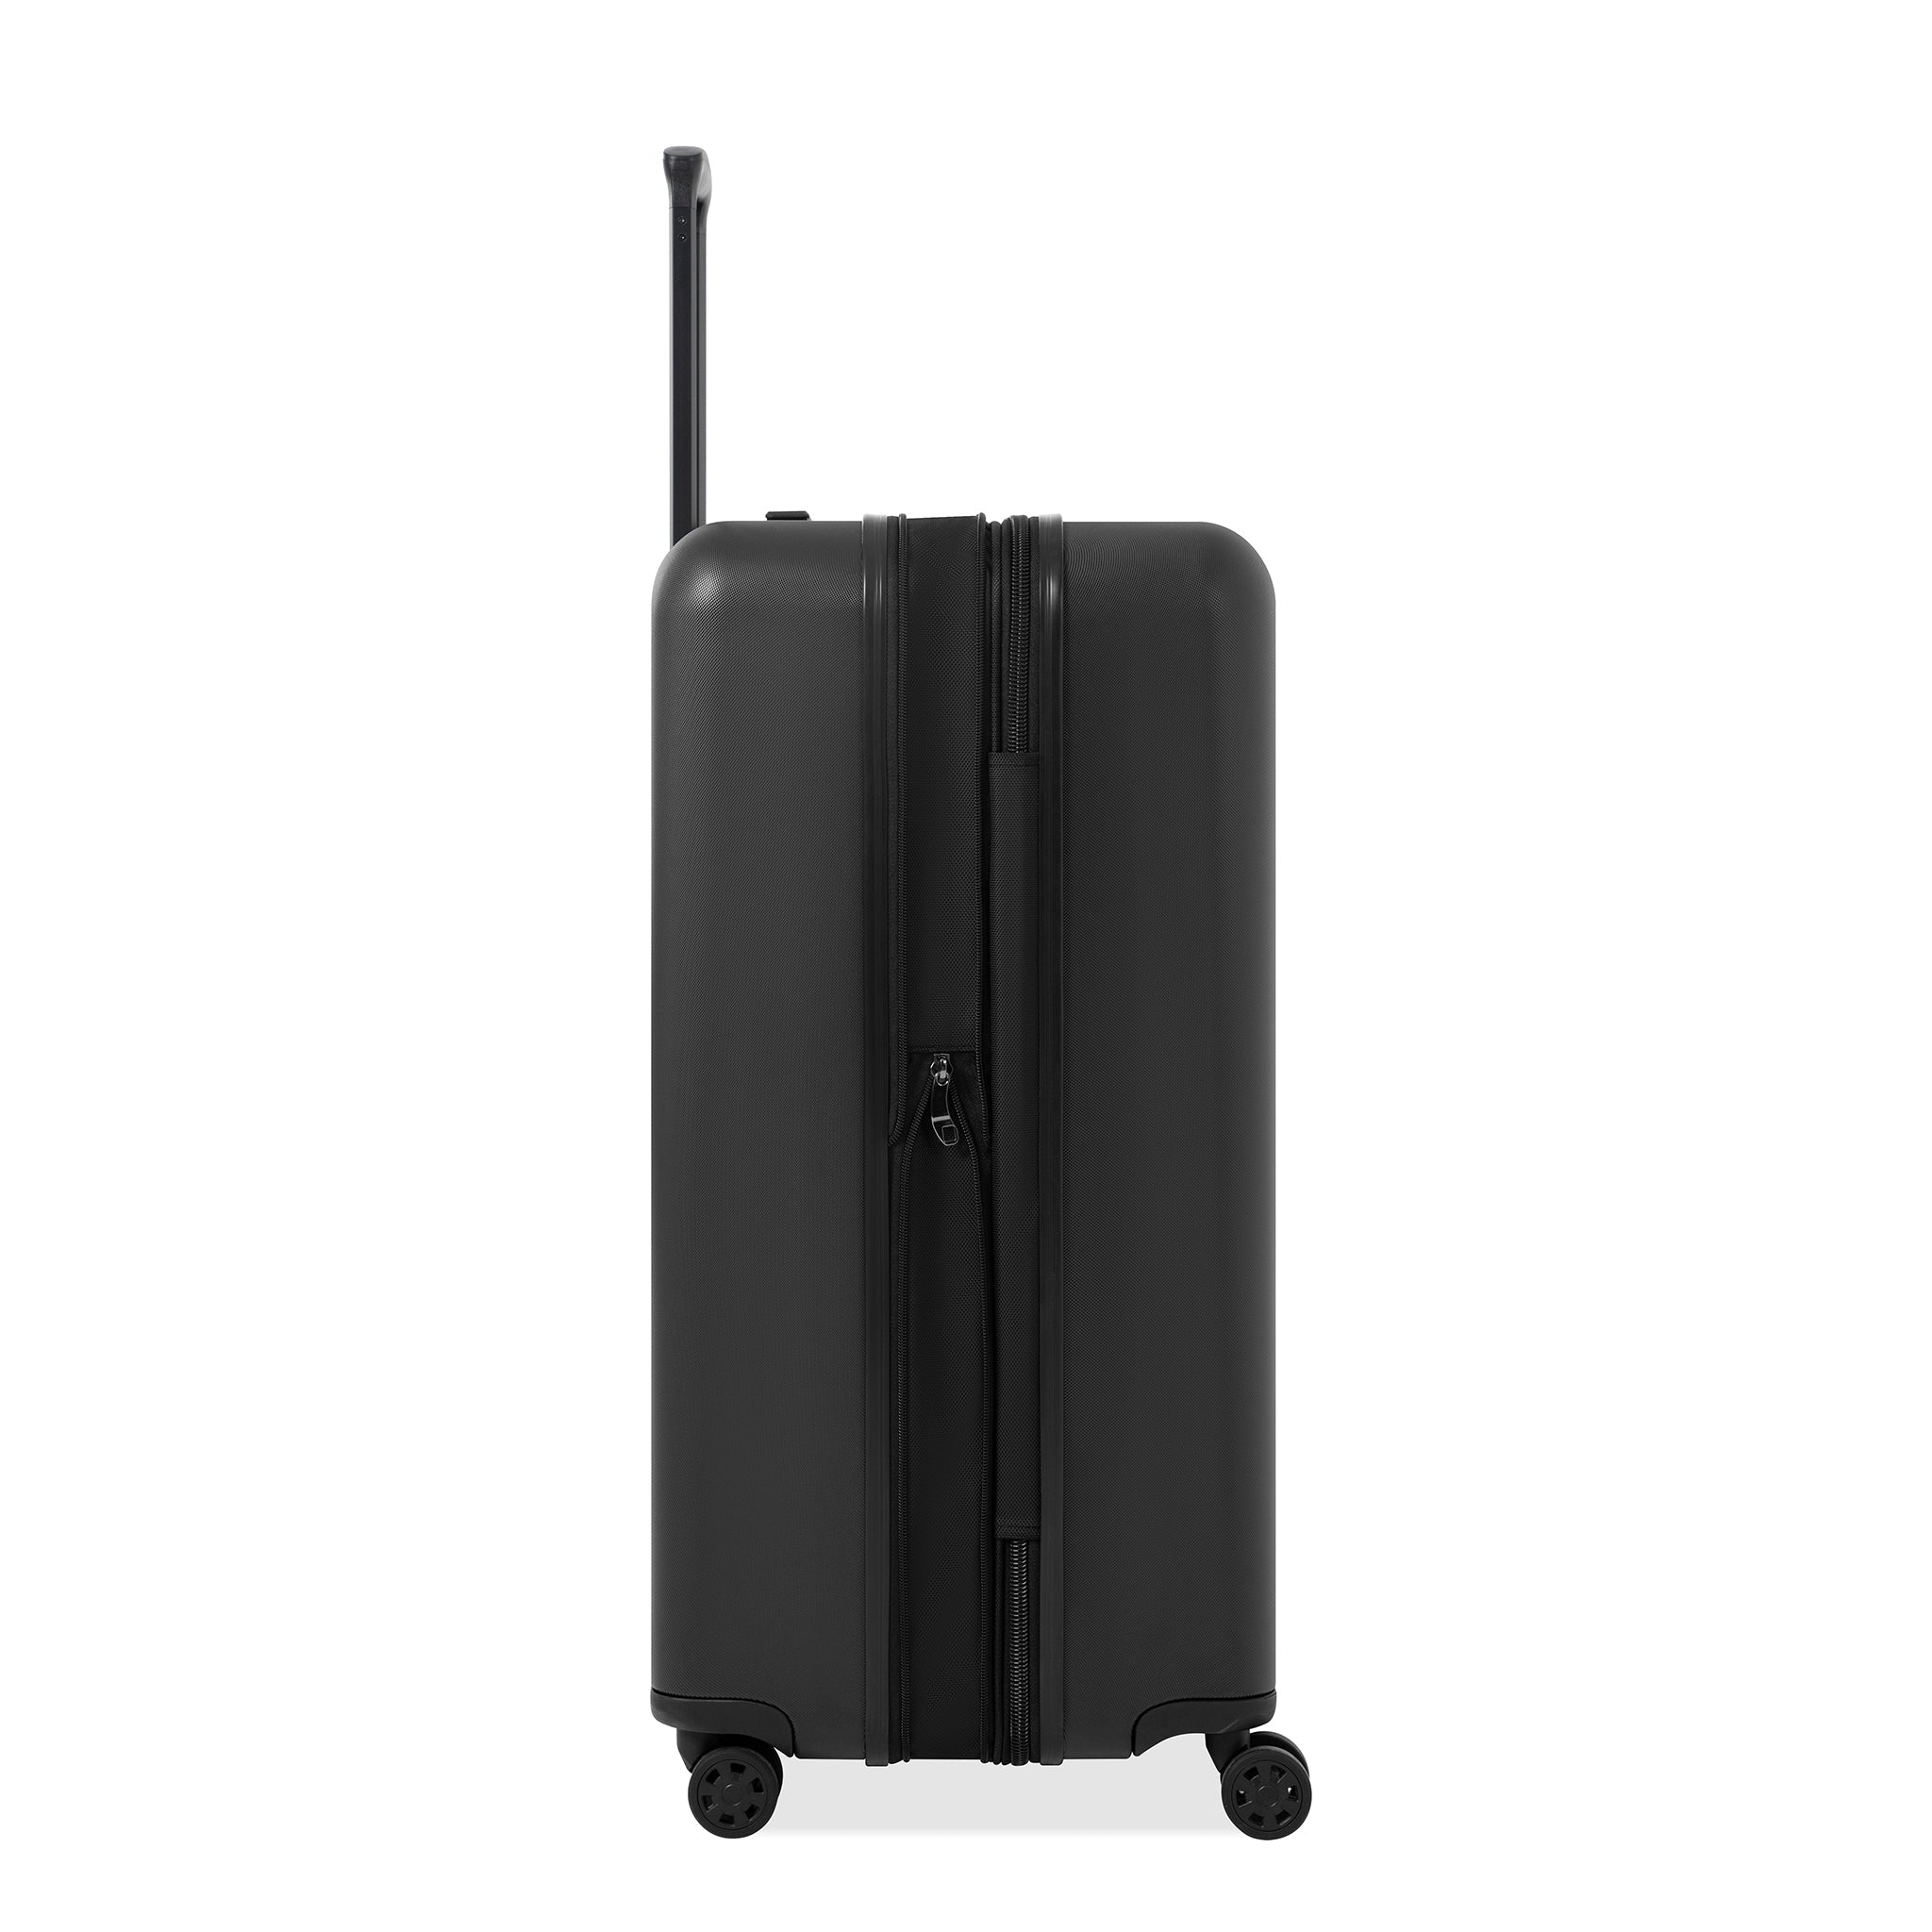 Side view of Sherpani hard-shell checked luggage, the Meridian in Black. Meridian features include a retractable luggage handle, uncrushable exterior, TSA-approved locking zippers and four 36-degree spinner wheels. 